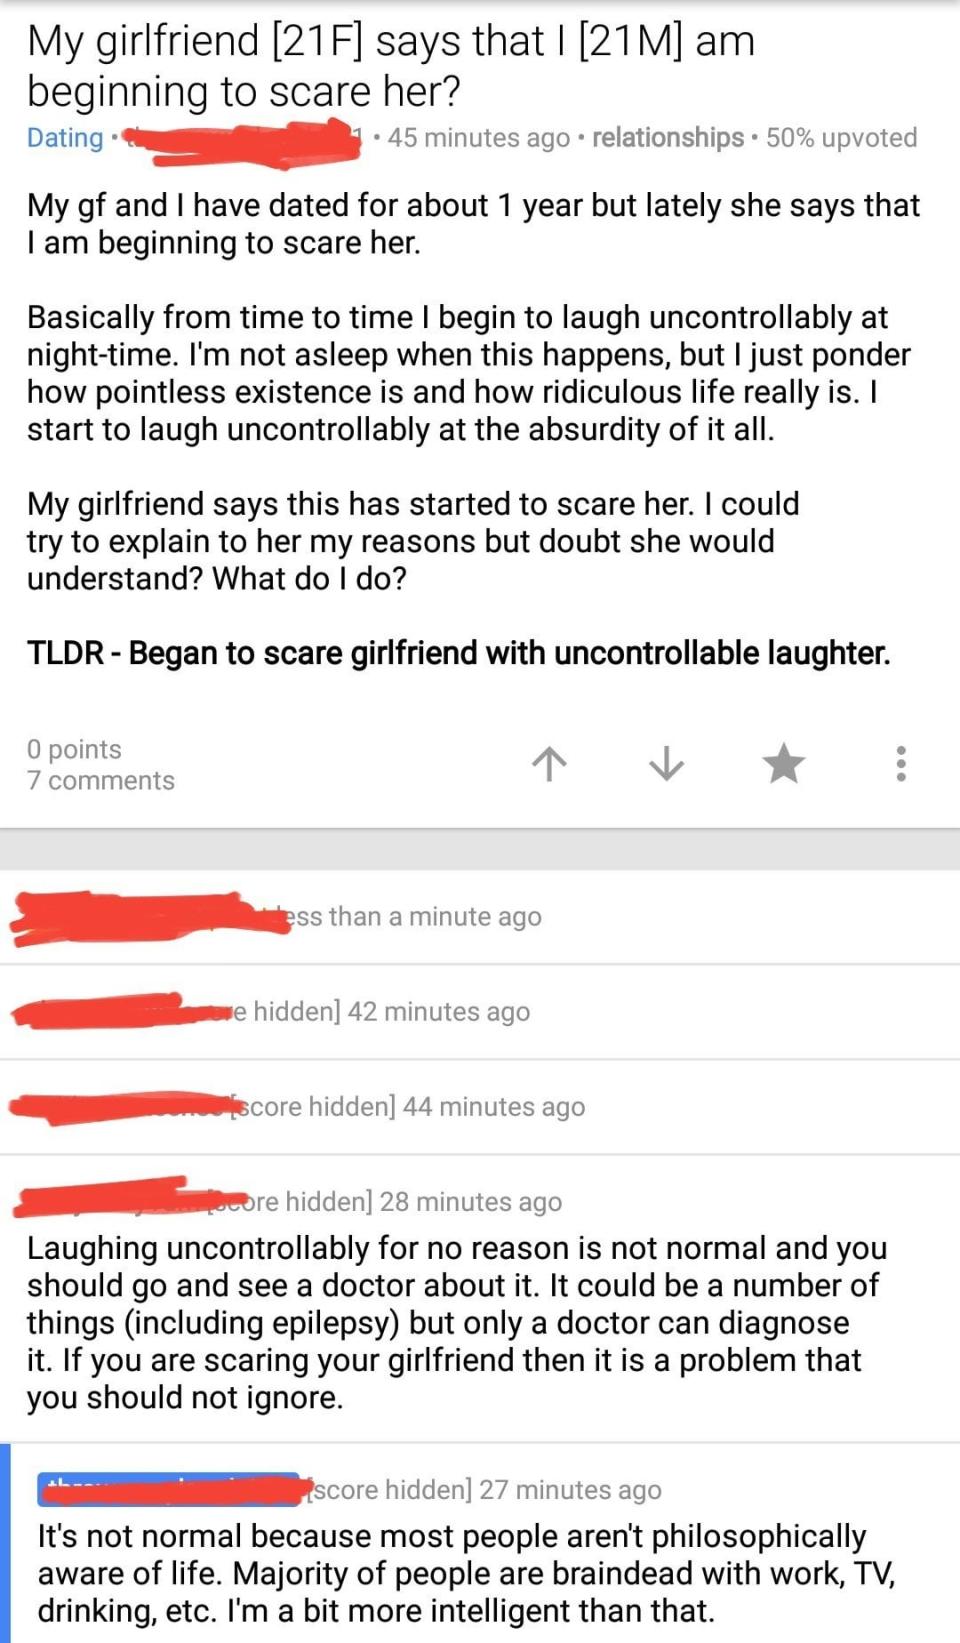 The image contains a Reddit post where a user shares concerns about uncontrollable laughter in serious situations and seeks advice